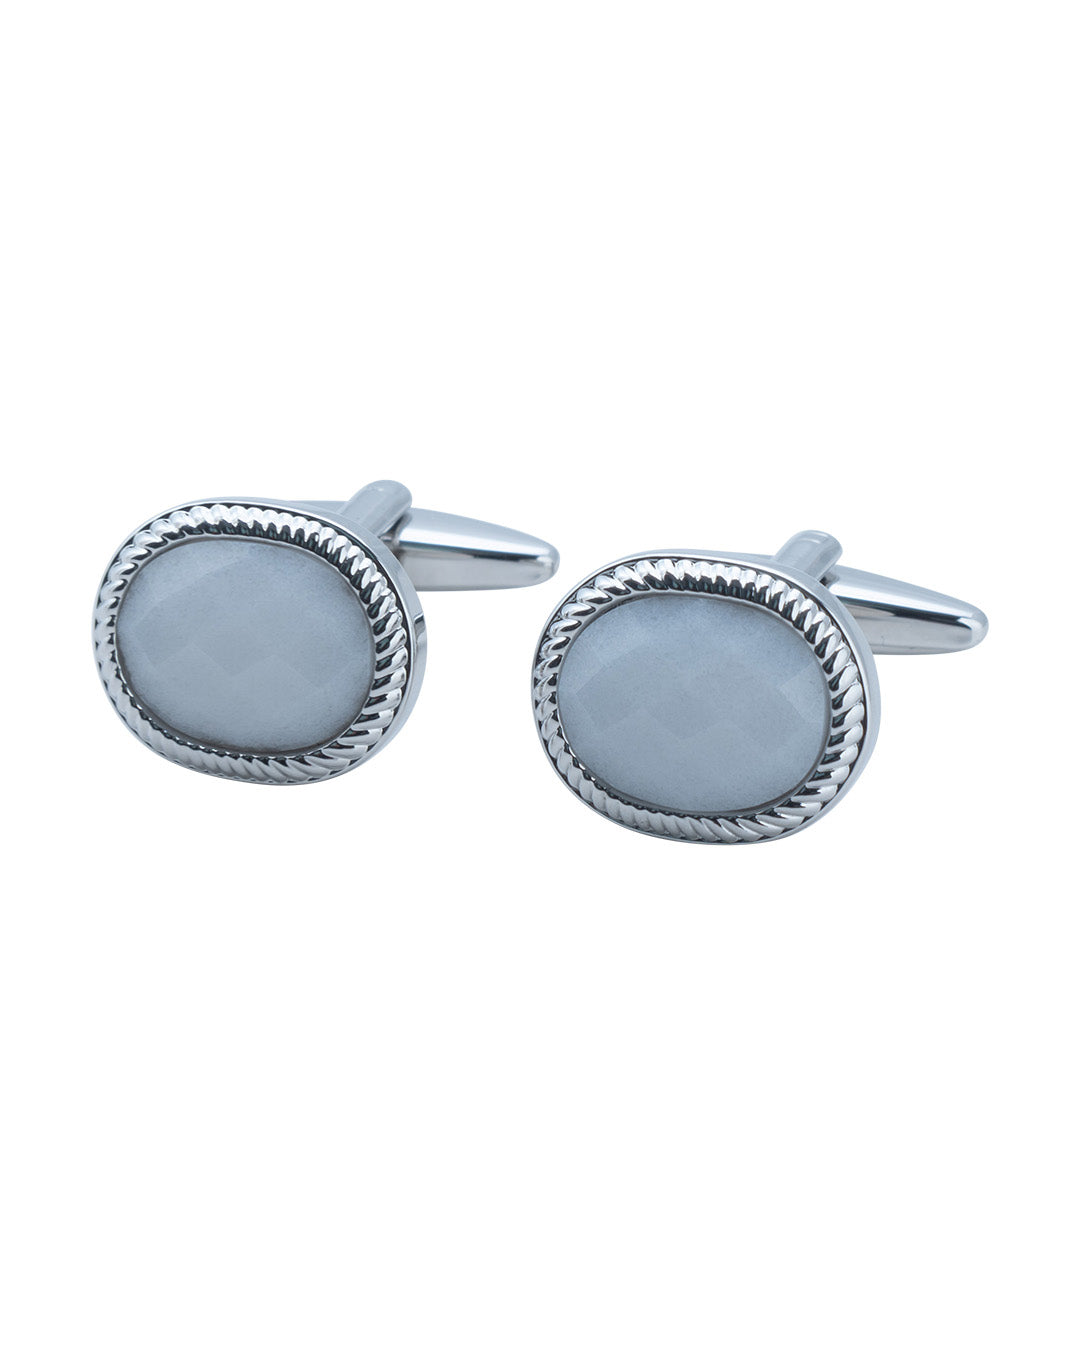 Oval Cufflinks With Textured Edge & White Faceted Stone